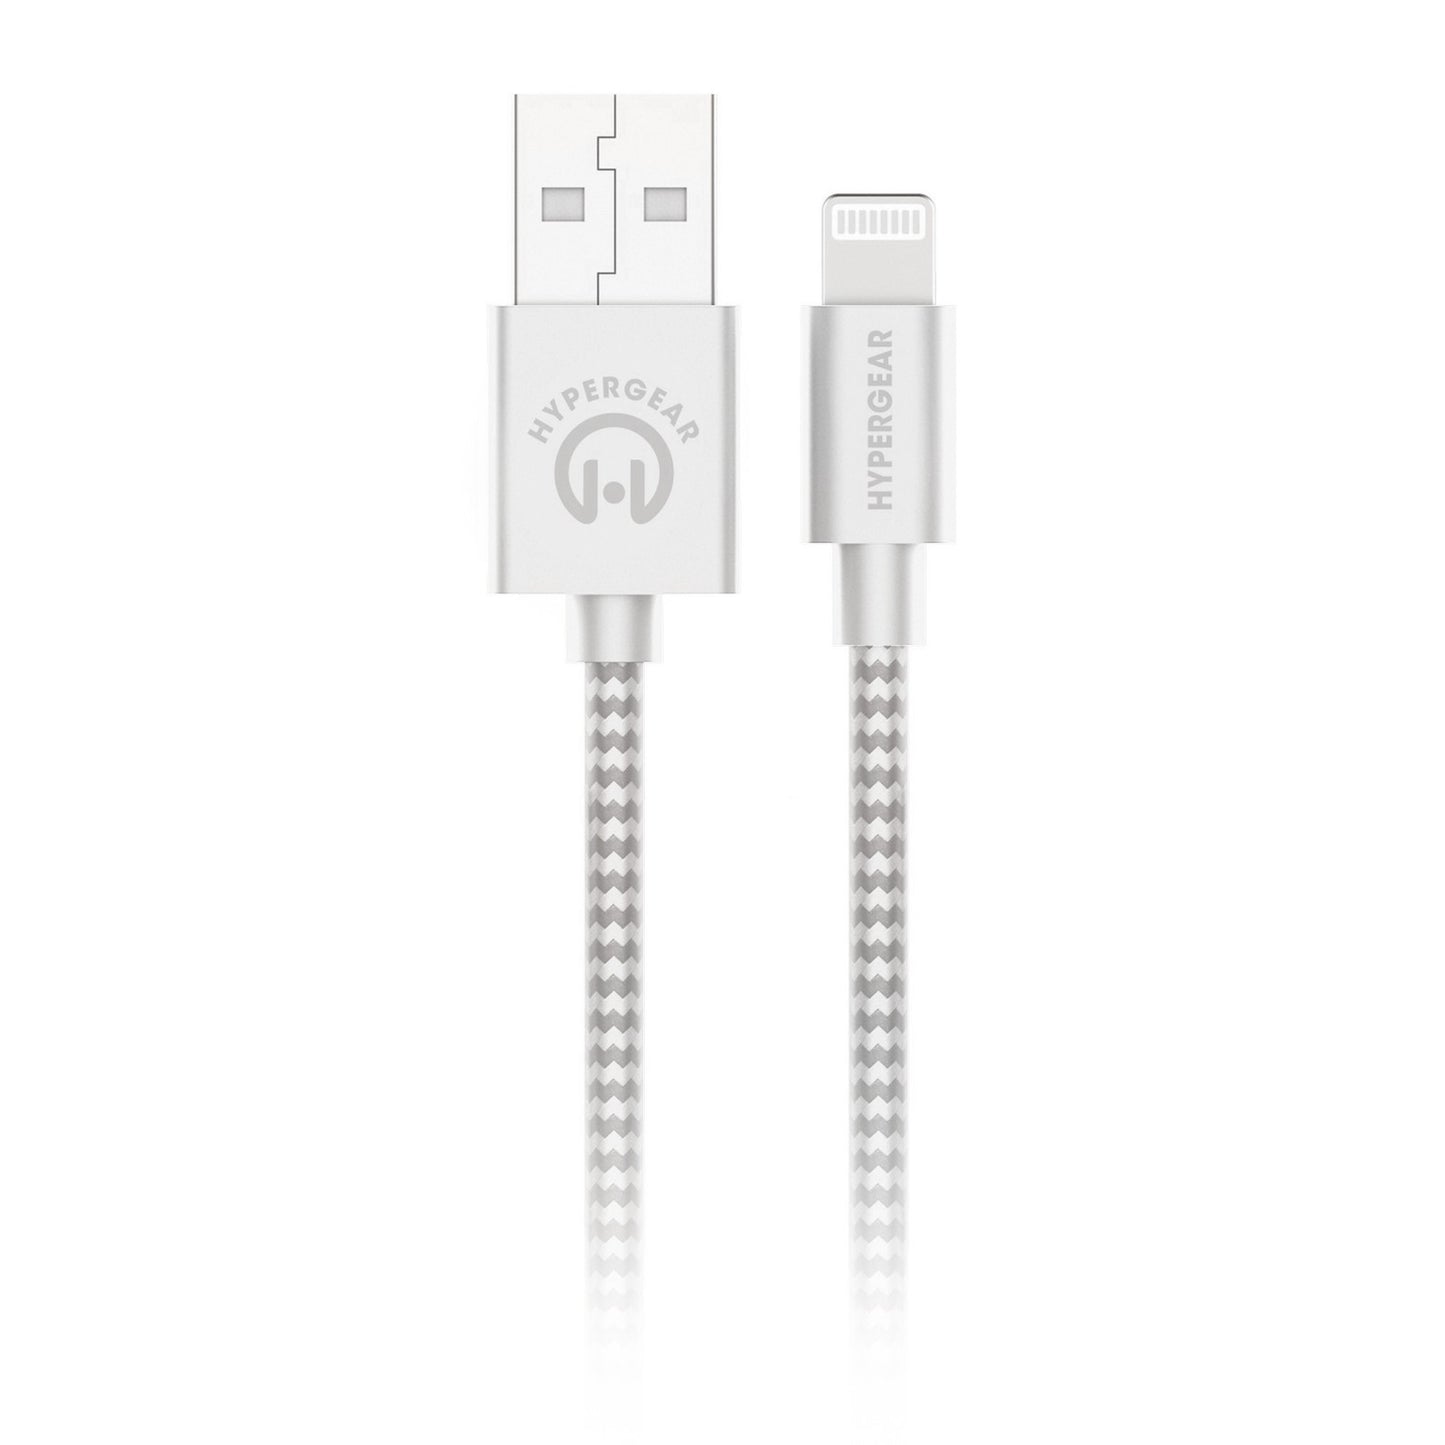 HyperGear 10 ft. (300cm) USB-A to Lightning Braided Charge and Sync Cable - White - 15-12113